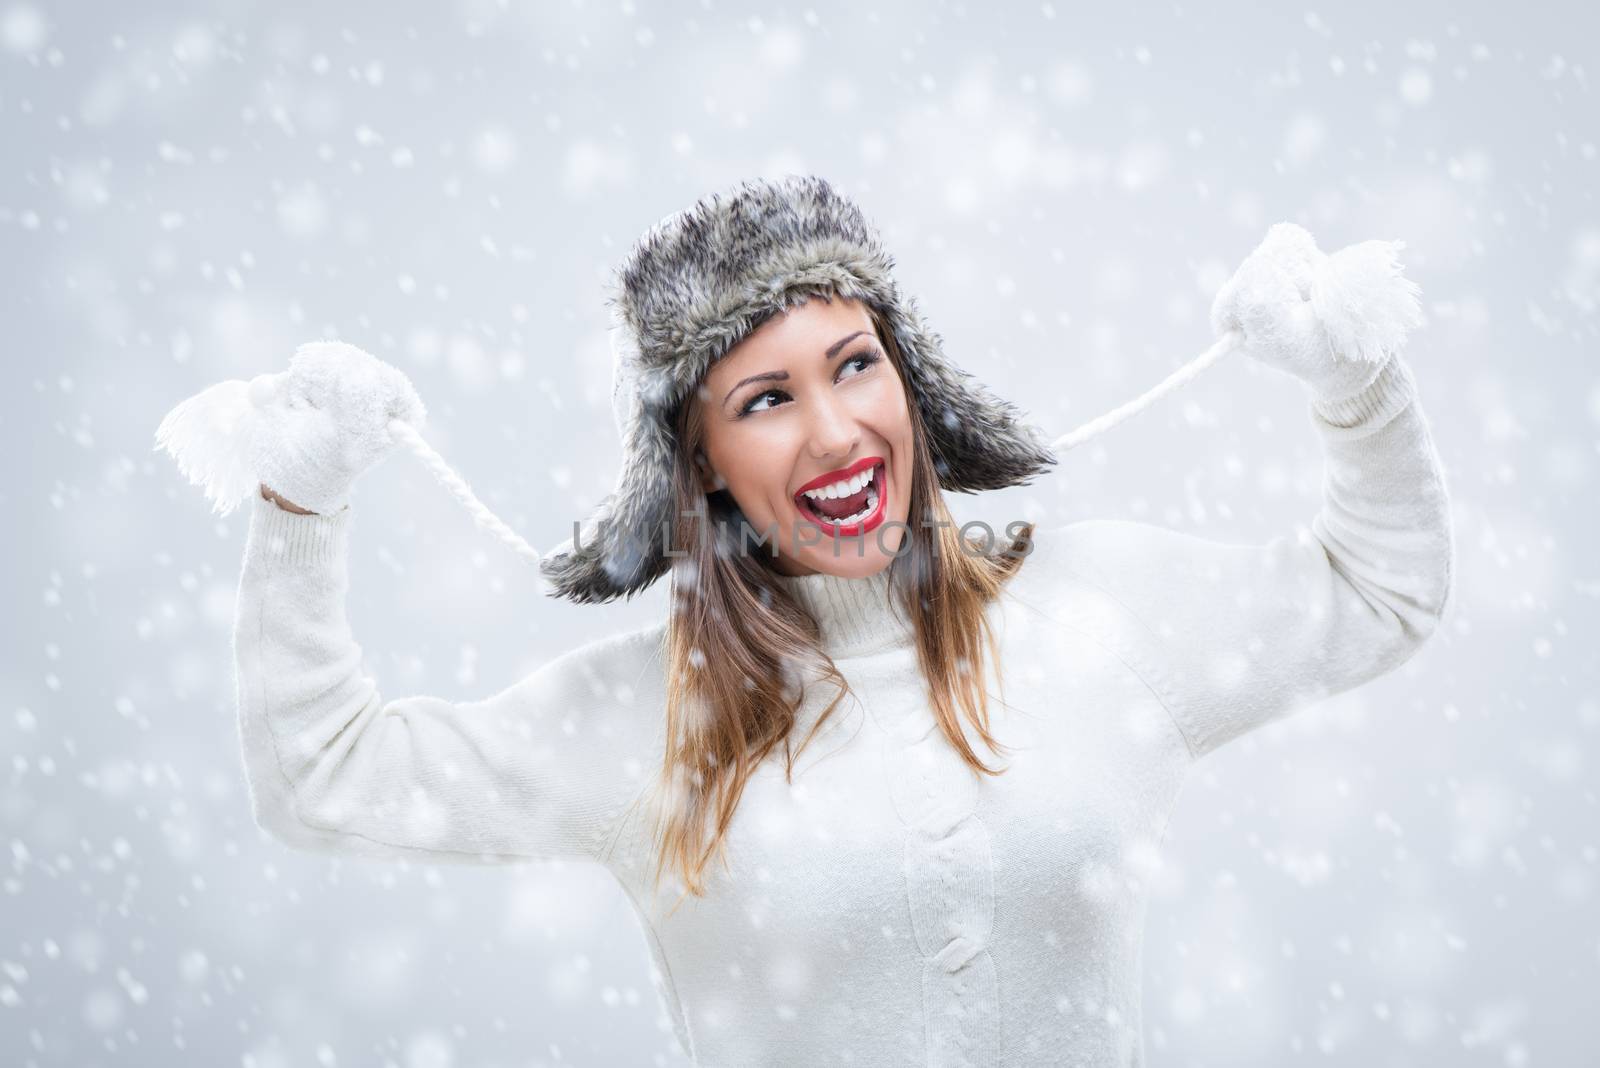 Cheerful beautiful young woman in warm clothing having fun while snowing.